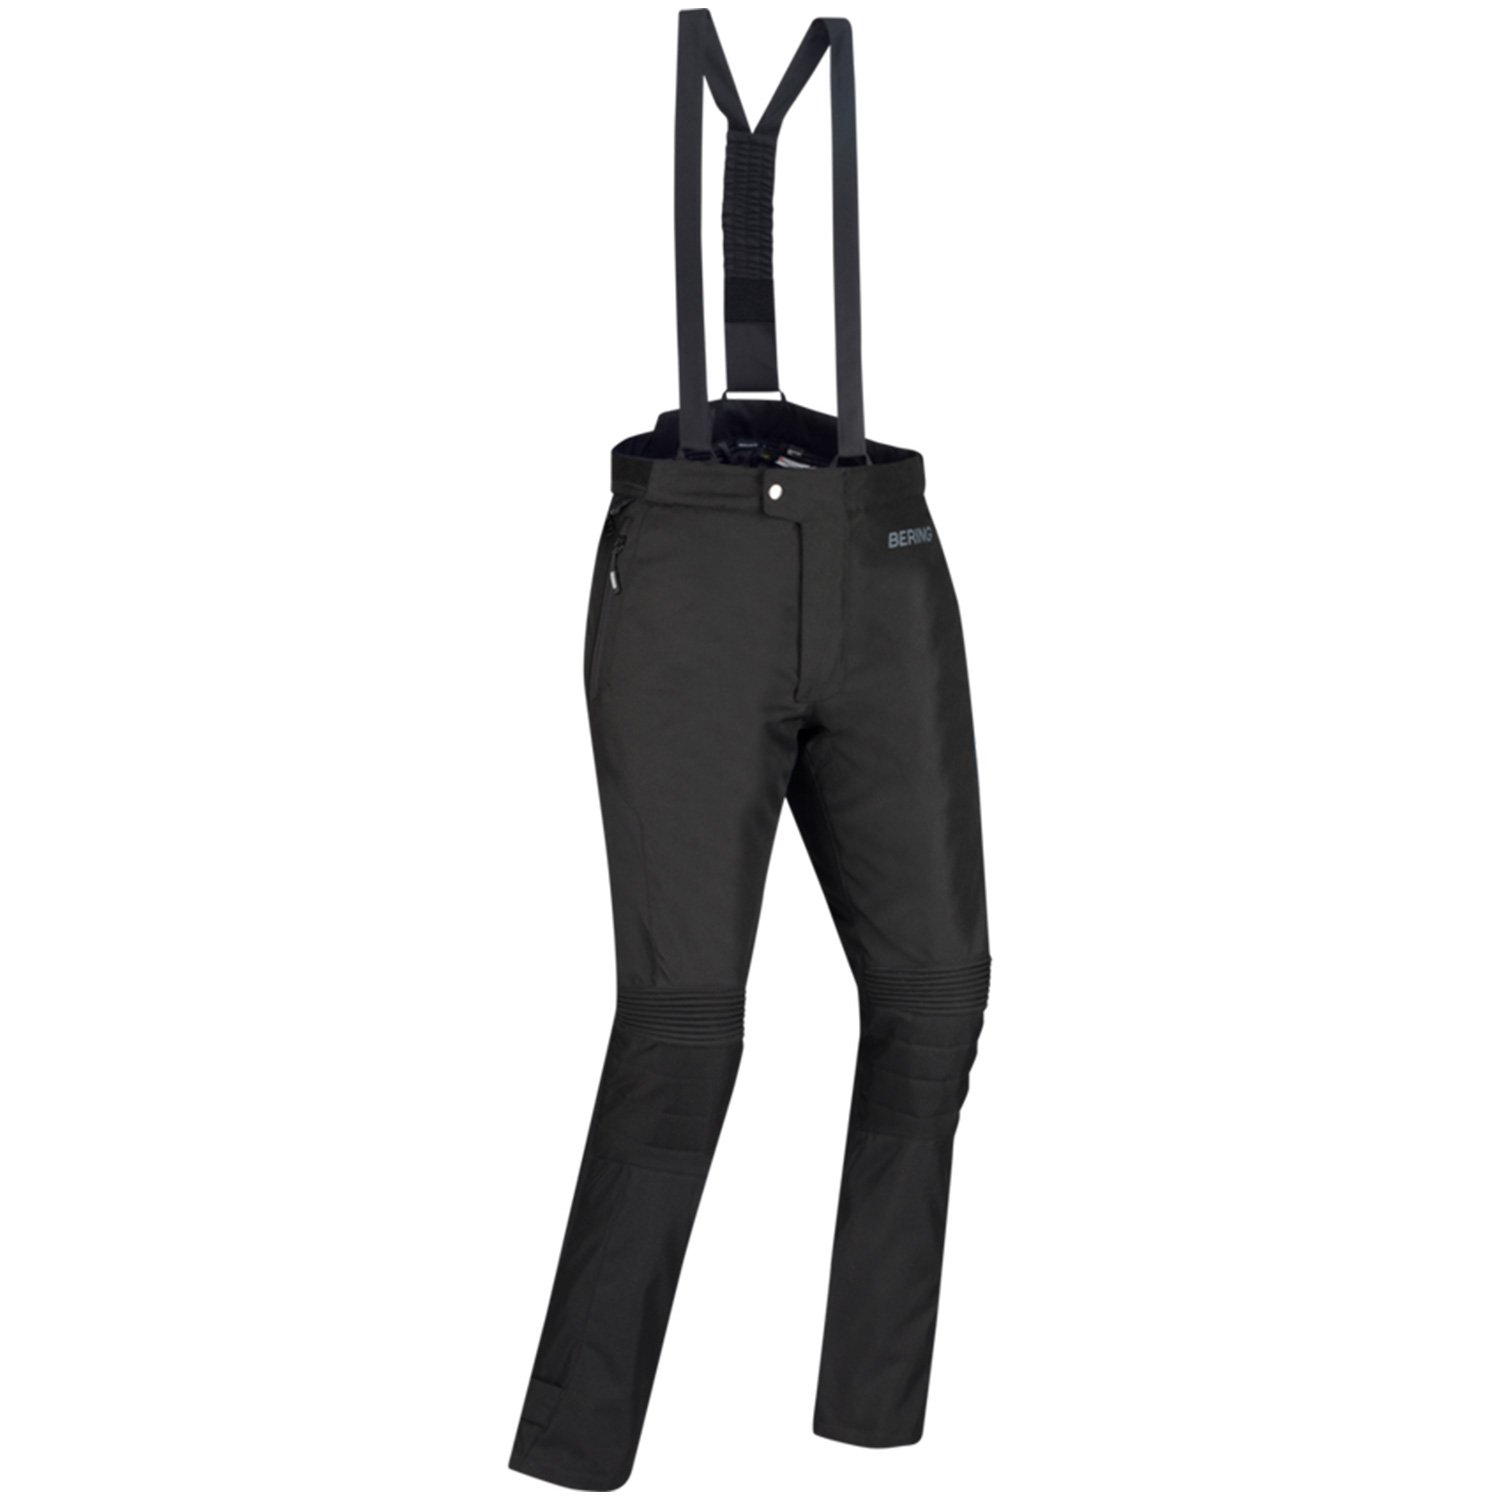 Image of Bering Siberia Trousers Black Size S ID 3660815181522